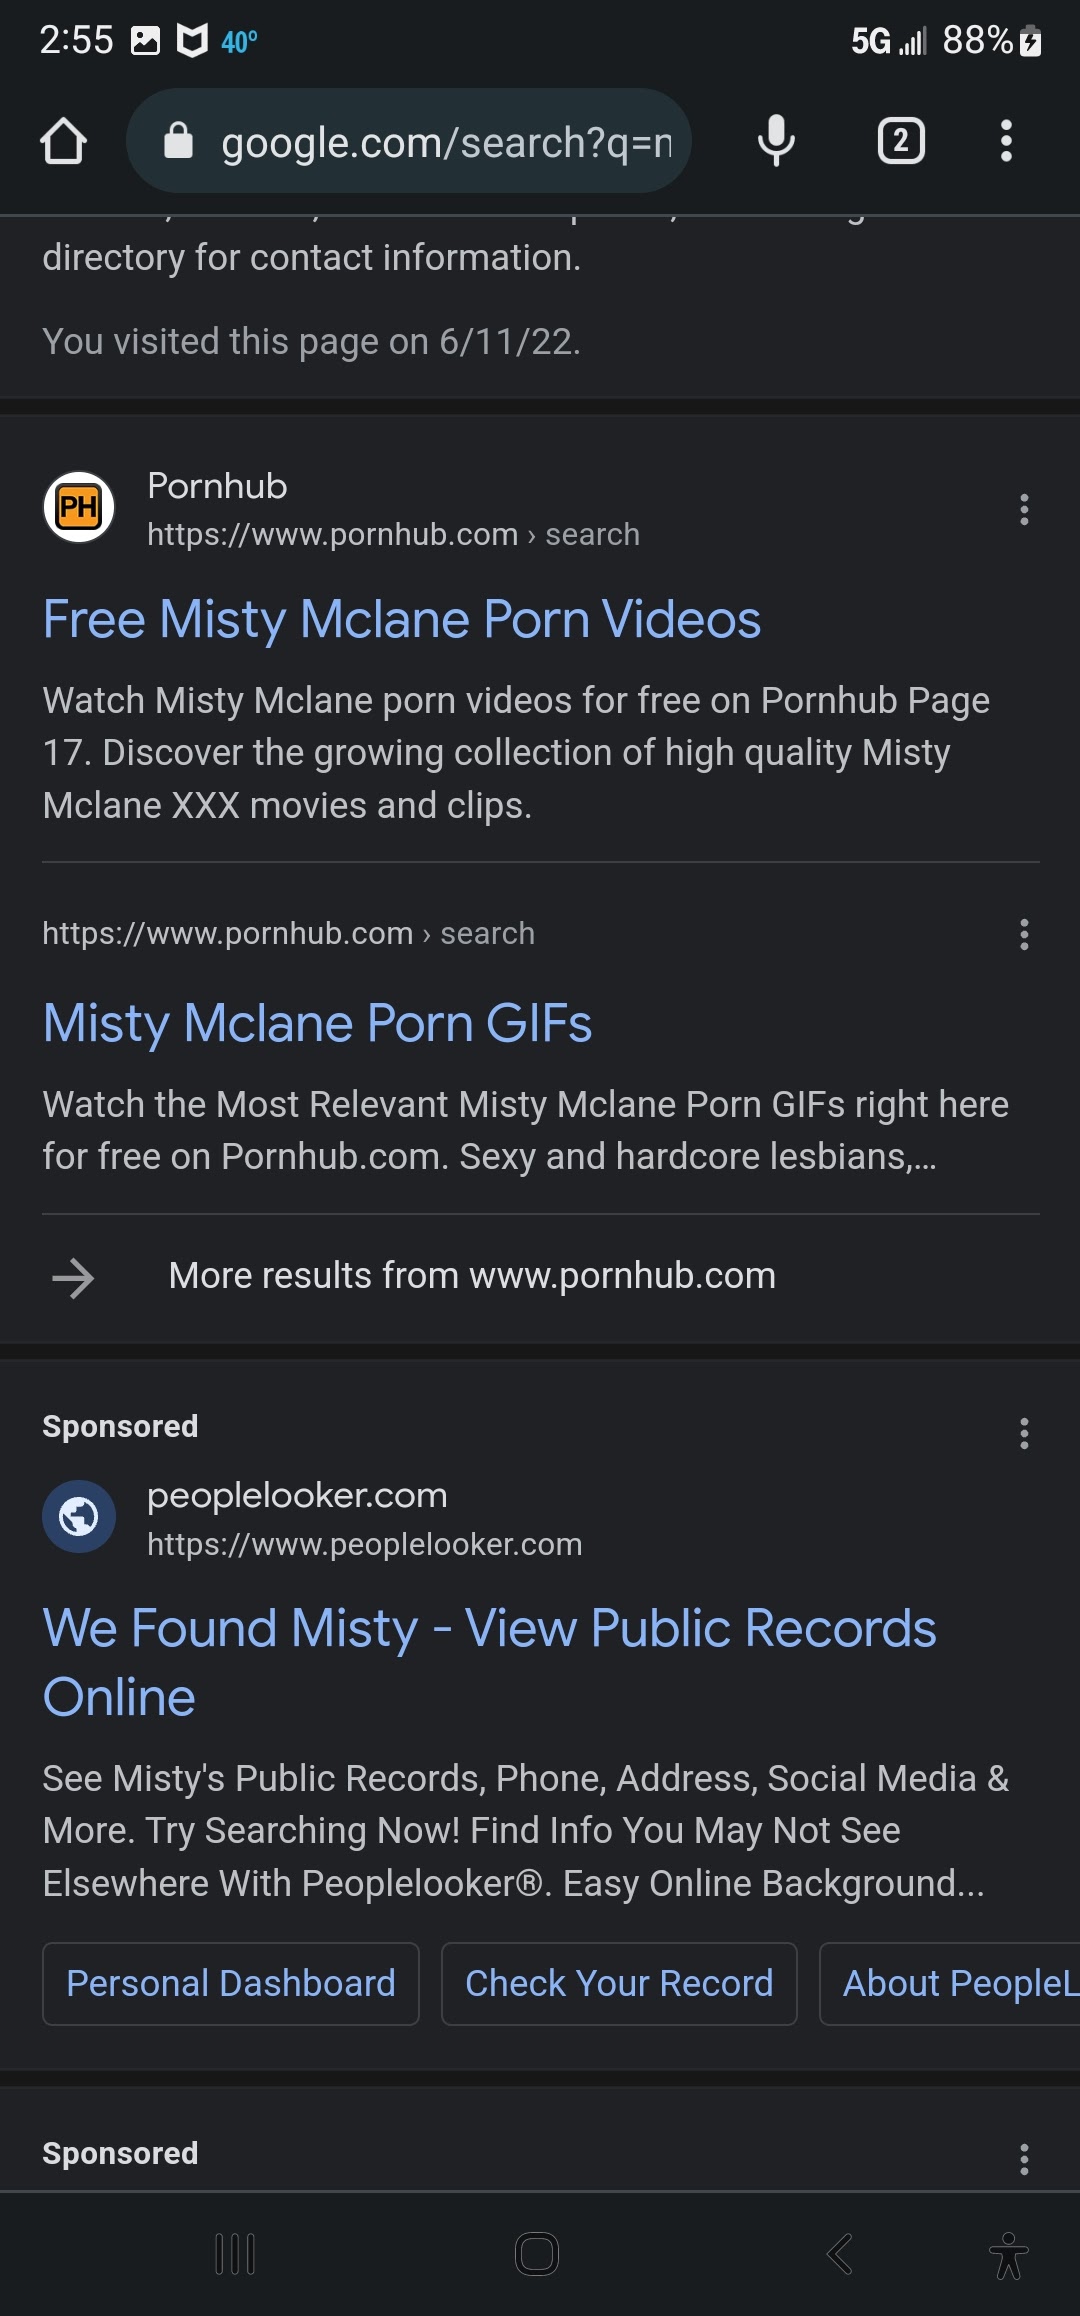 Porn In Hq Form - My name pulls me up on porn sites that I'm not on - Google Search Community